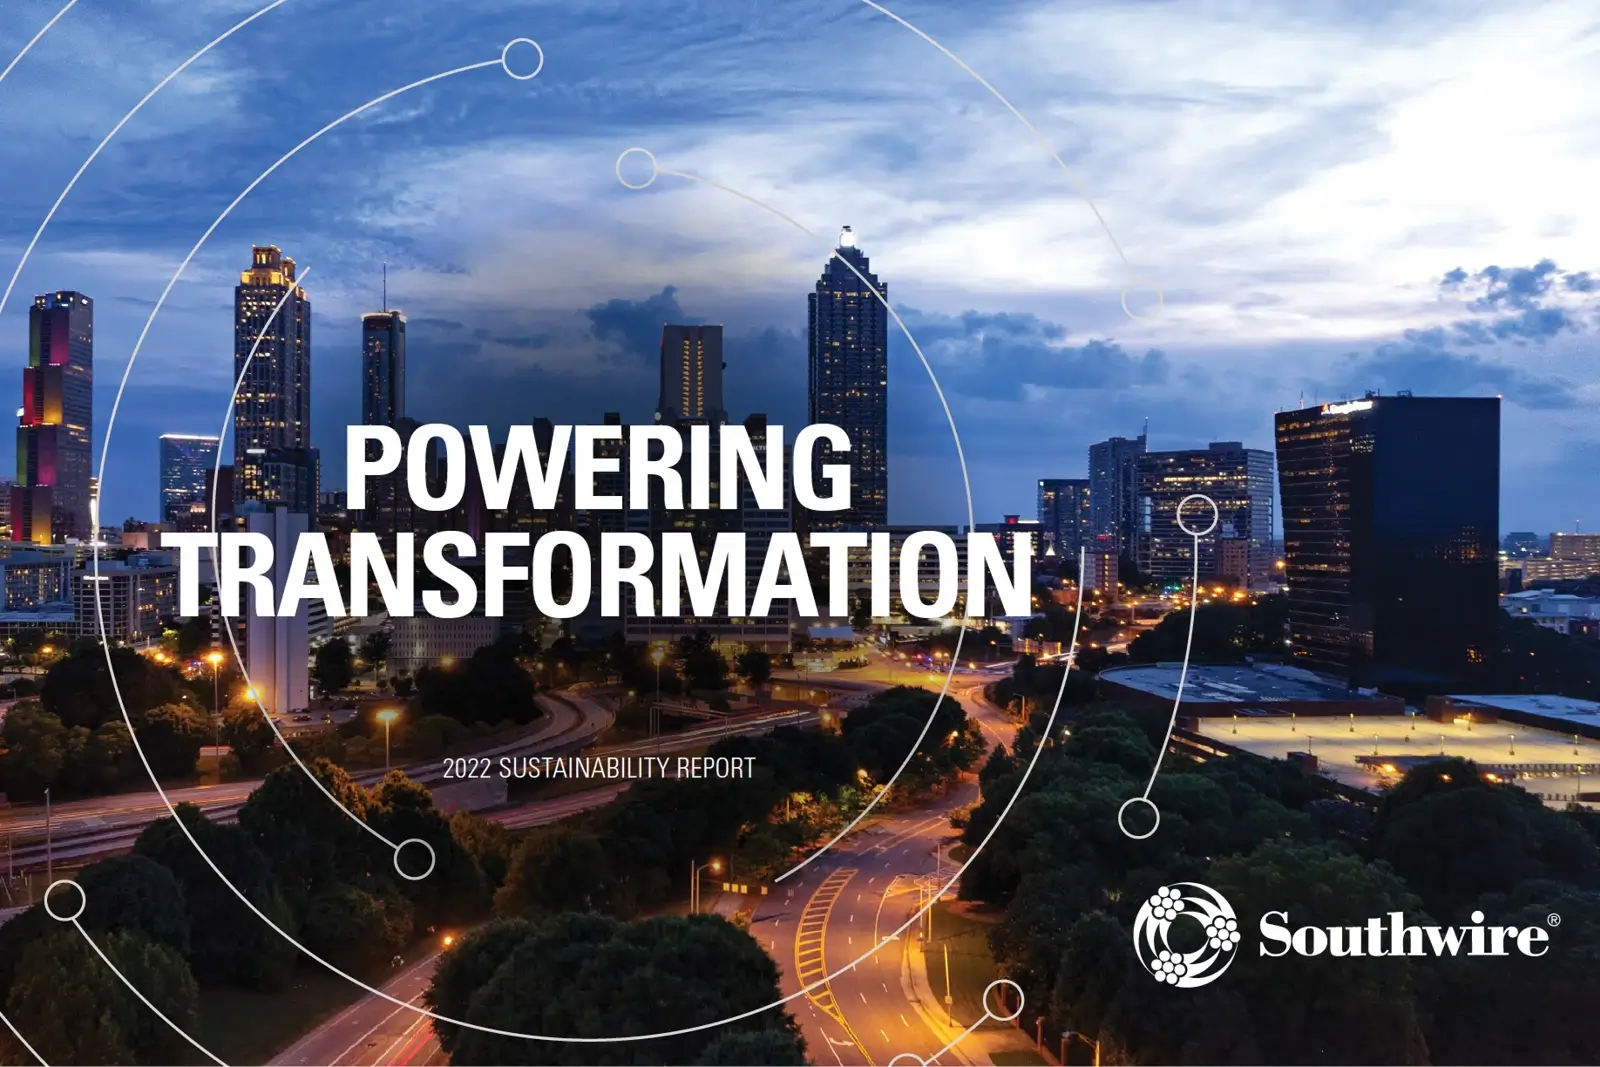 Southwire is Powering Transformation by Focusing on Company’s Sustainability Goals